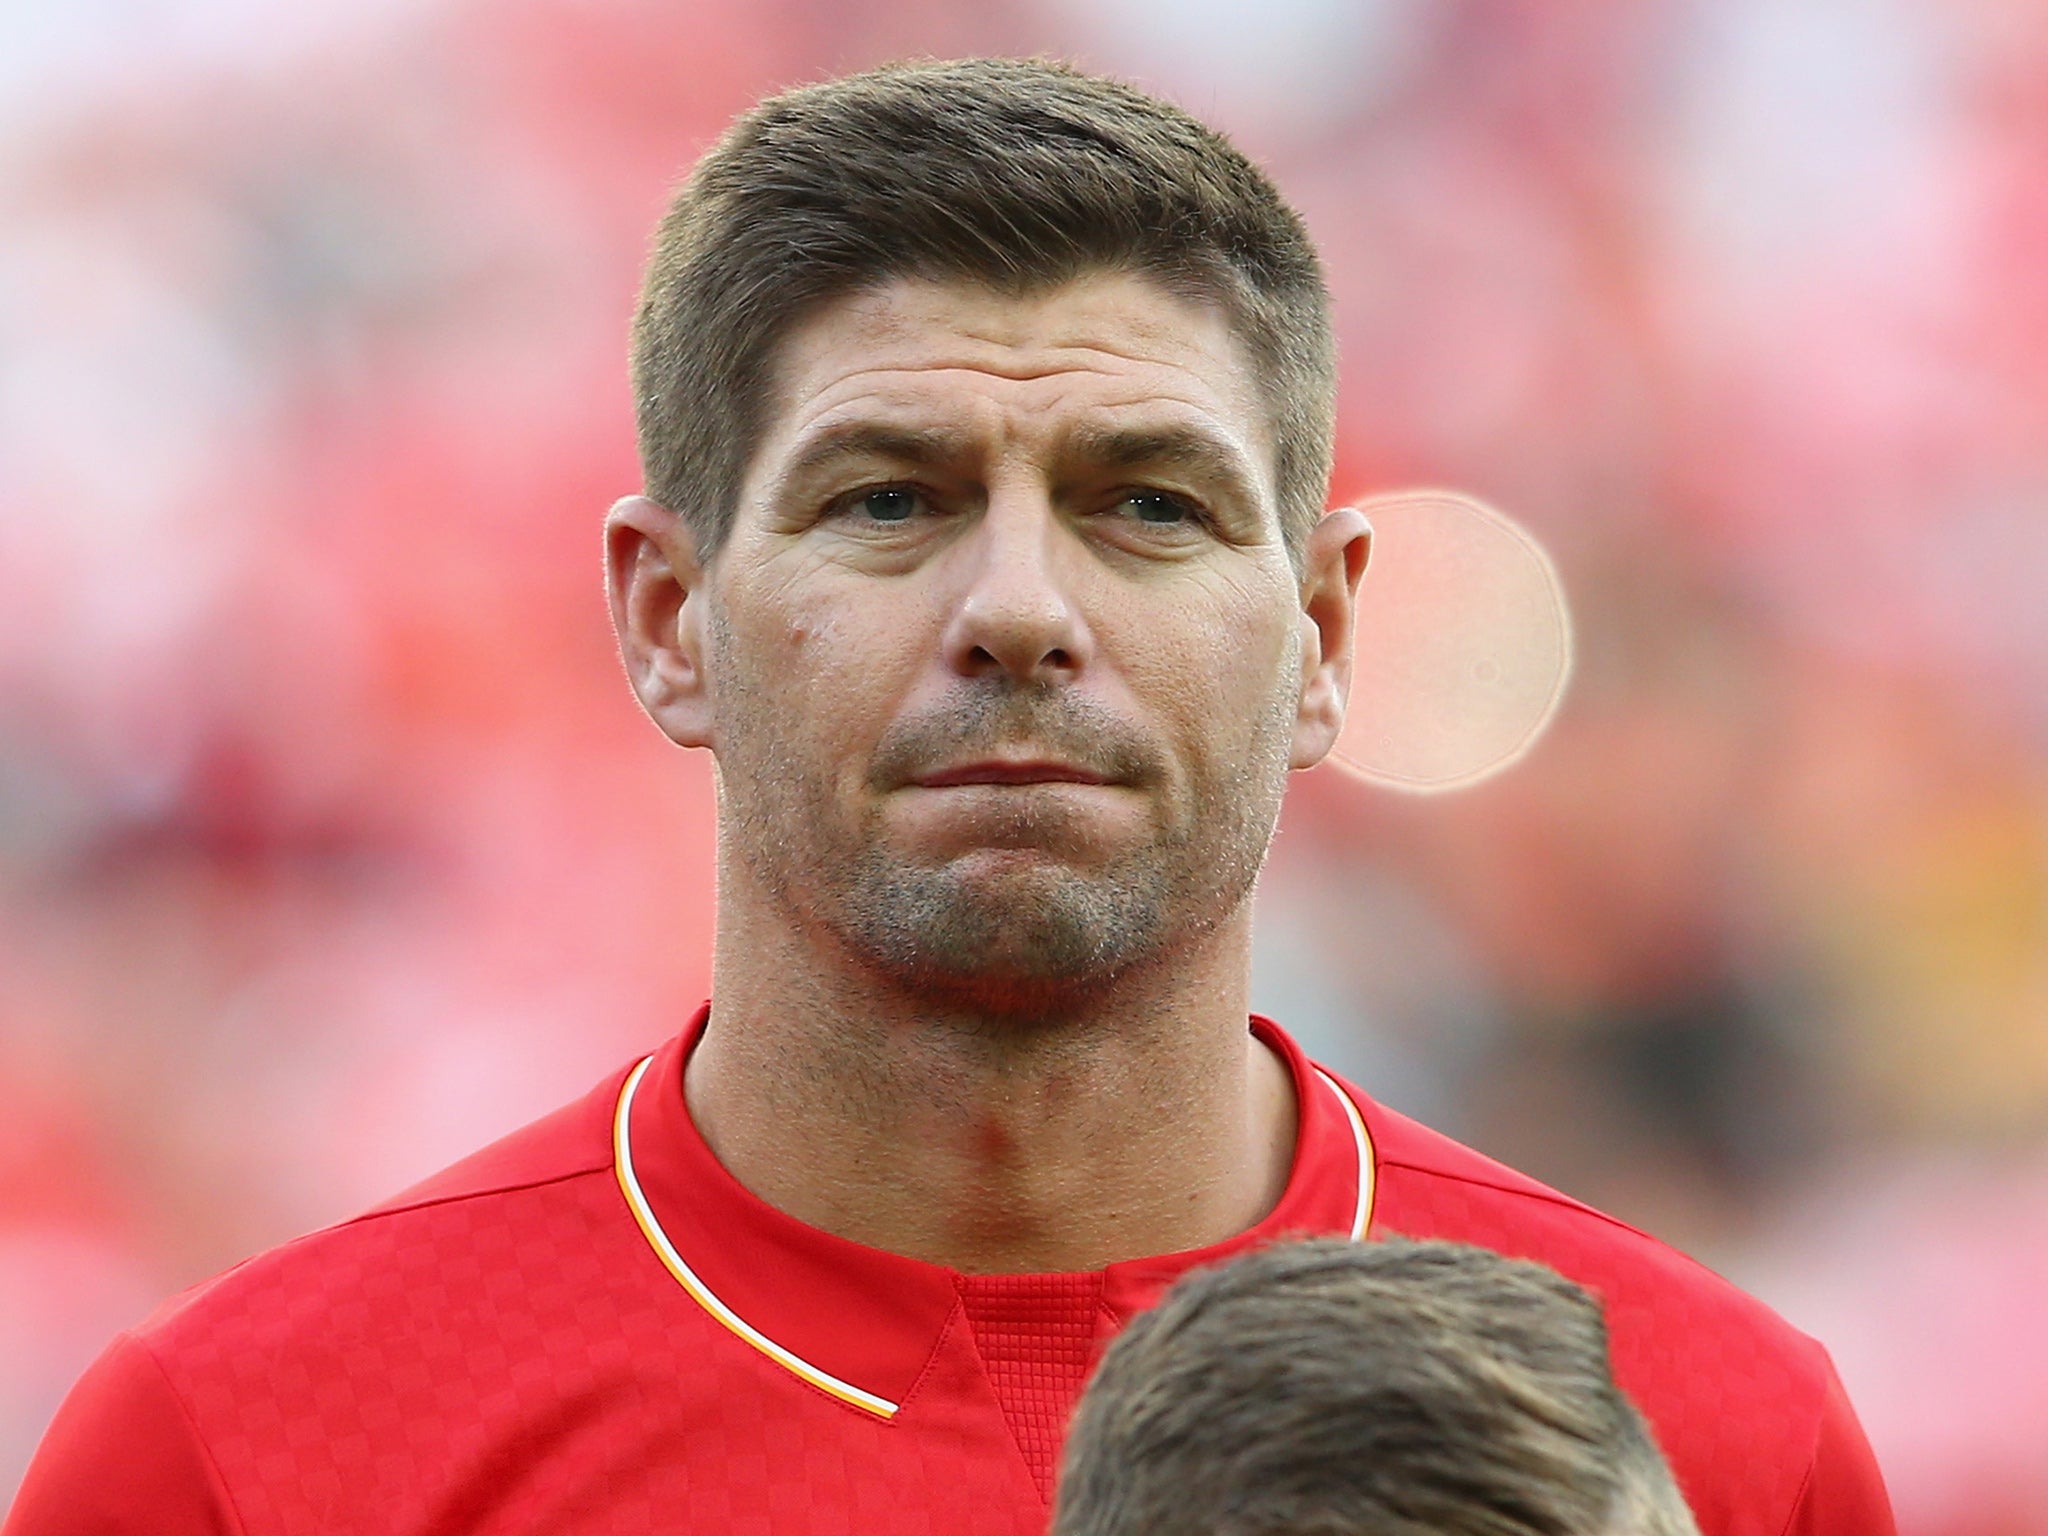 Gerrard appeared for a Liverpool 'legends' side earlier this year